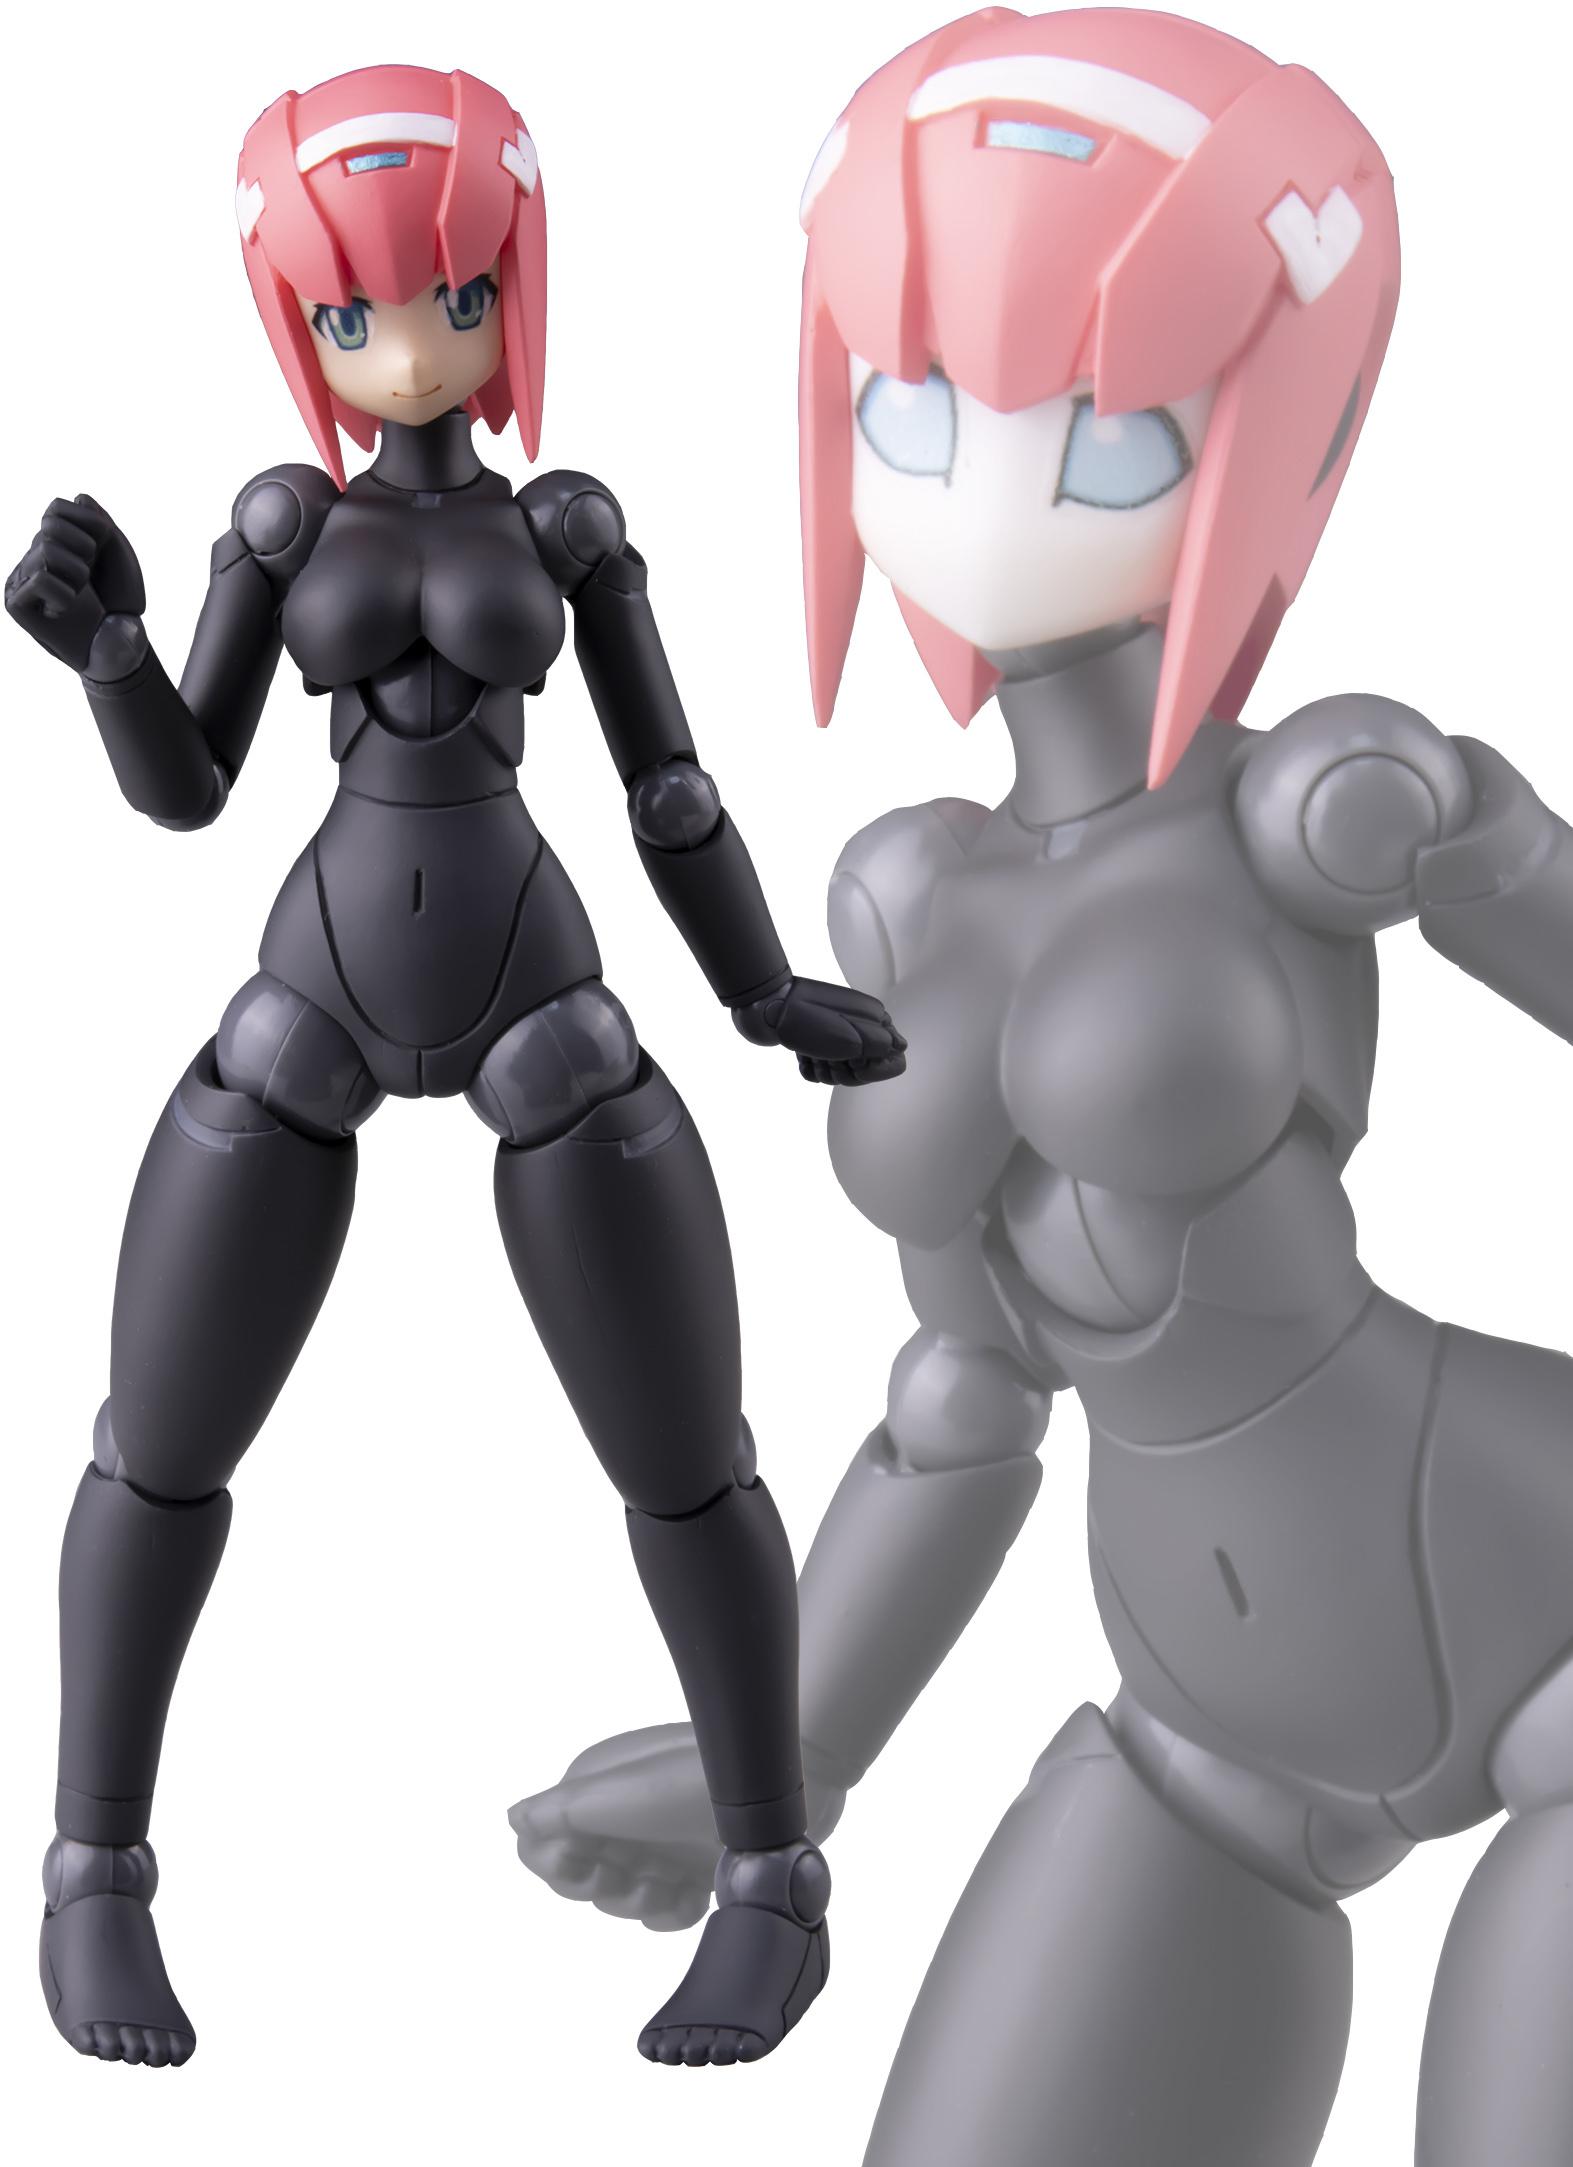 Daibadi Production Polynian FMM Clover Update Version Action Figure for sale online 